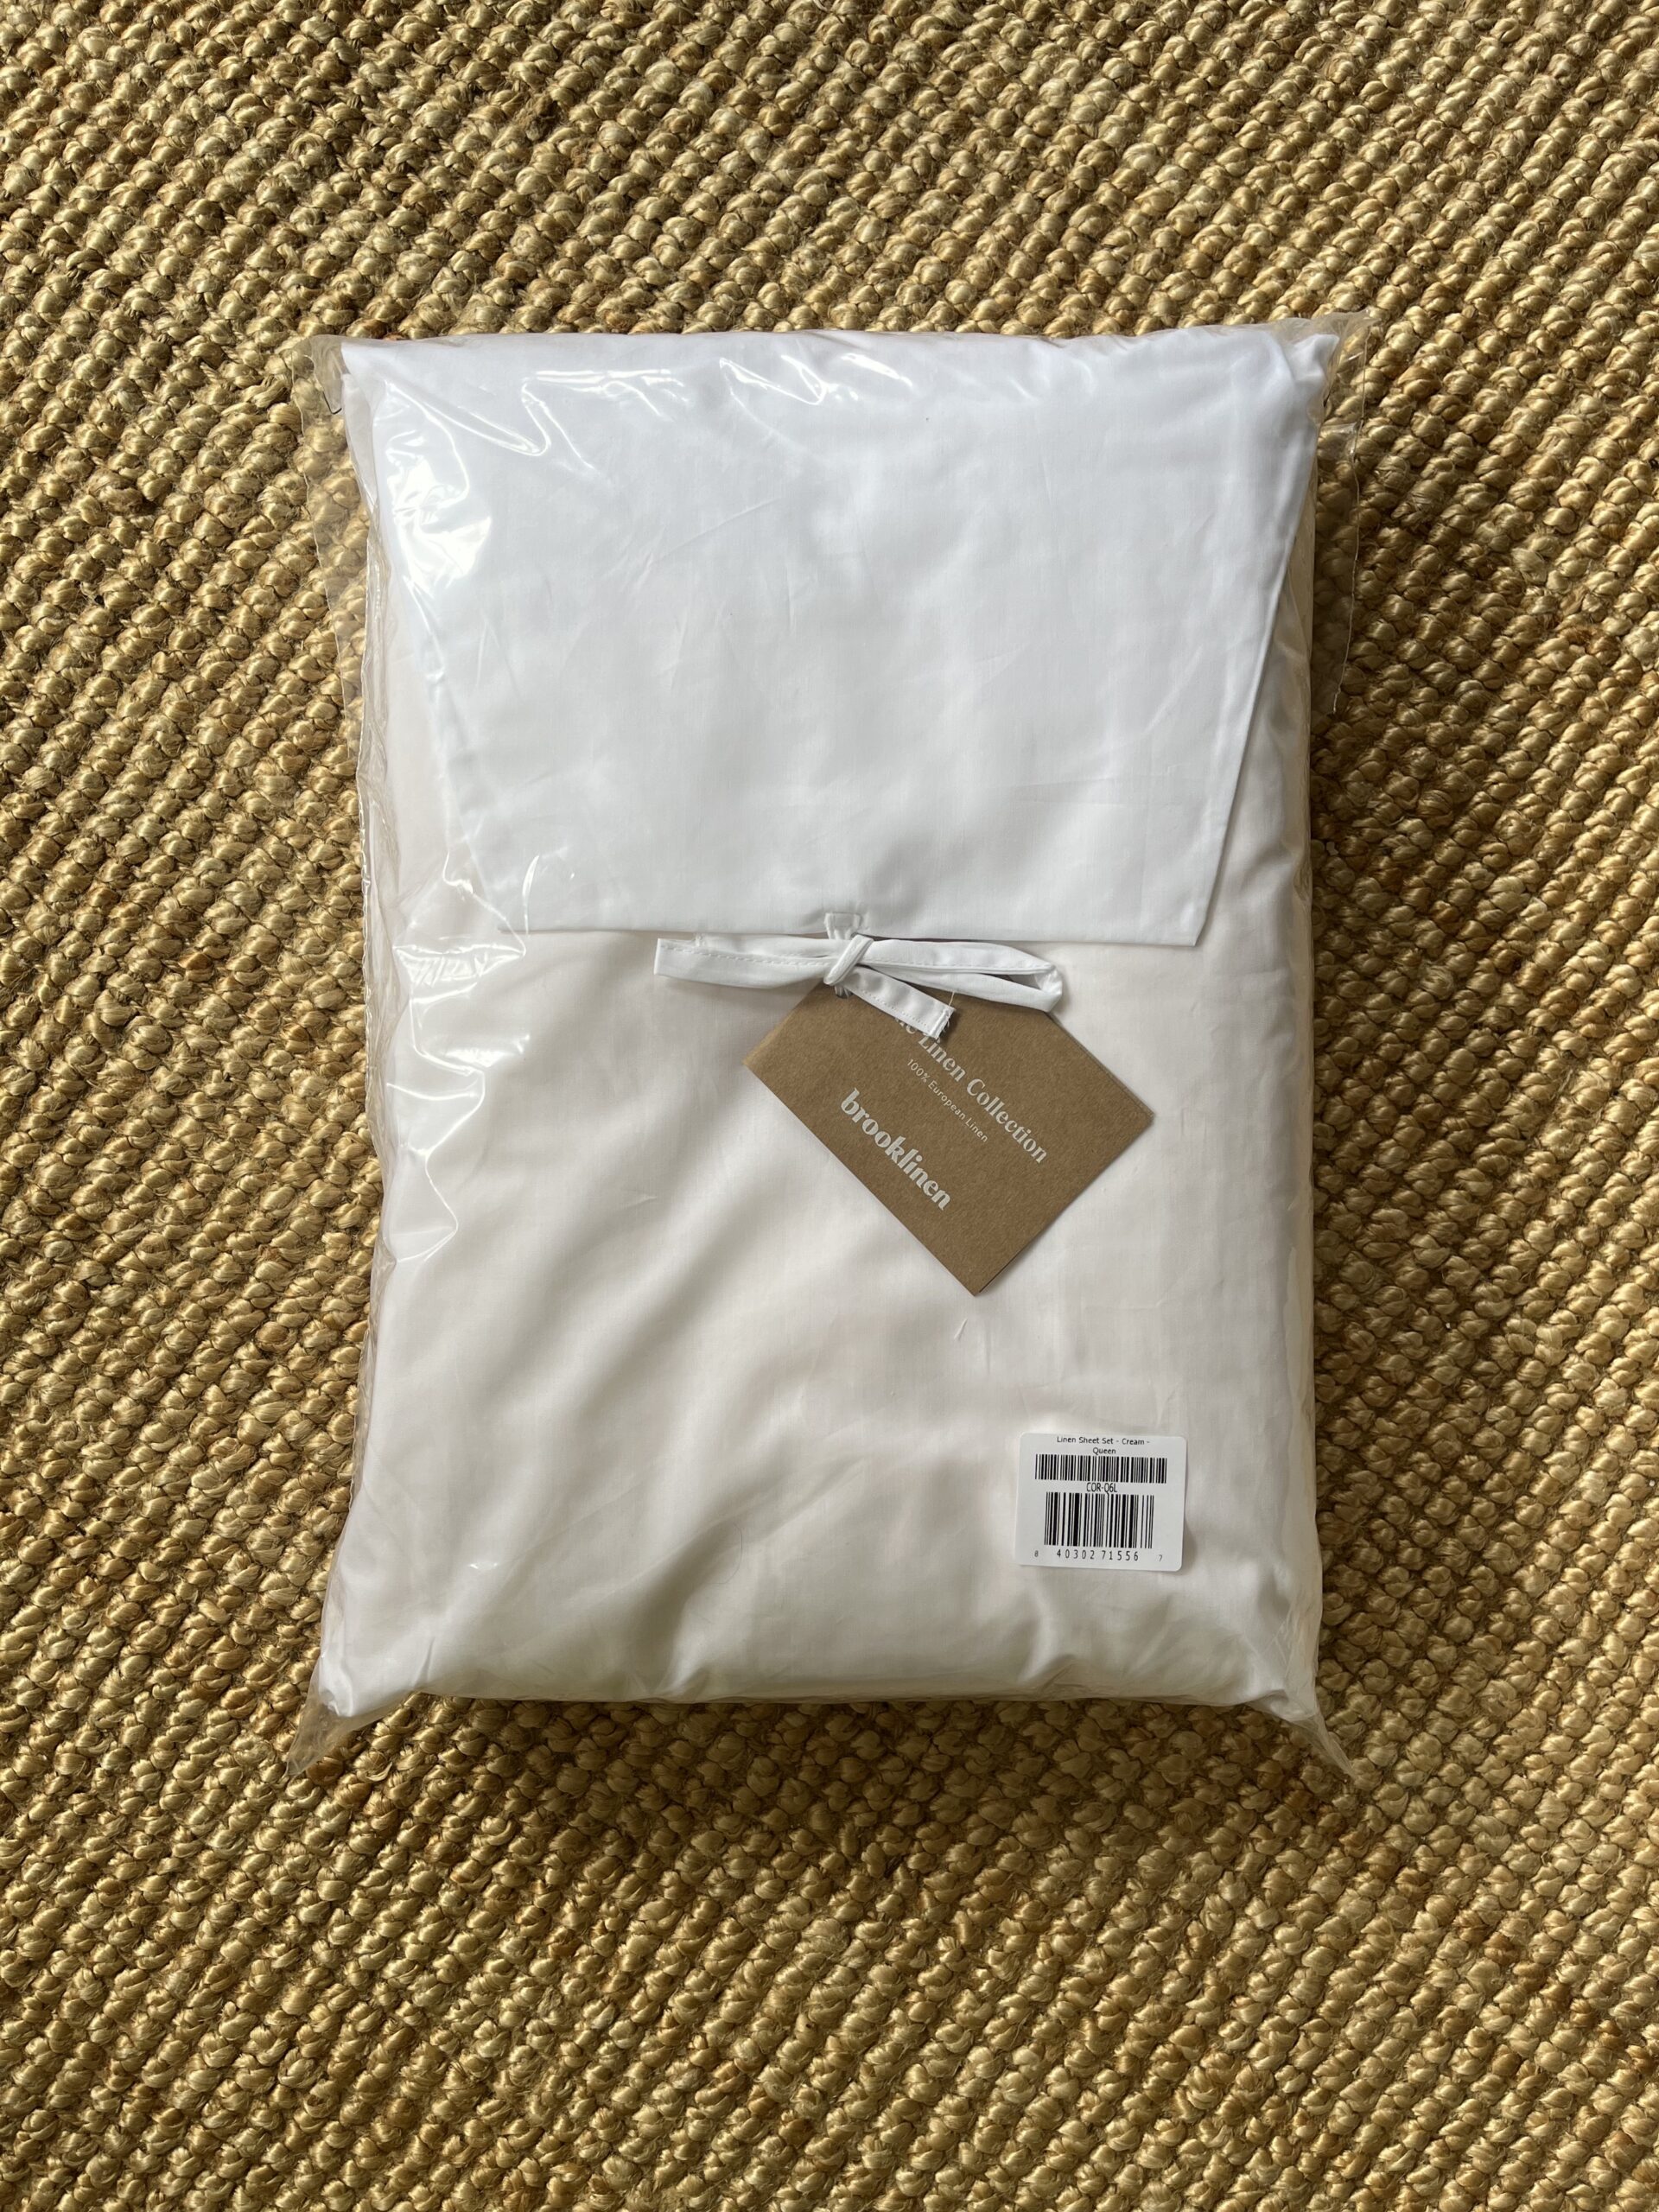 A packaged white and beige bedding set is shown with a cardboard label attached. The set is placed on a woven textured surface.